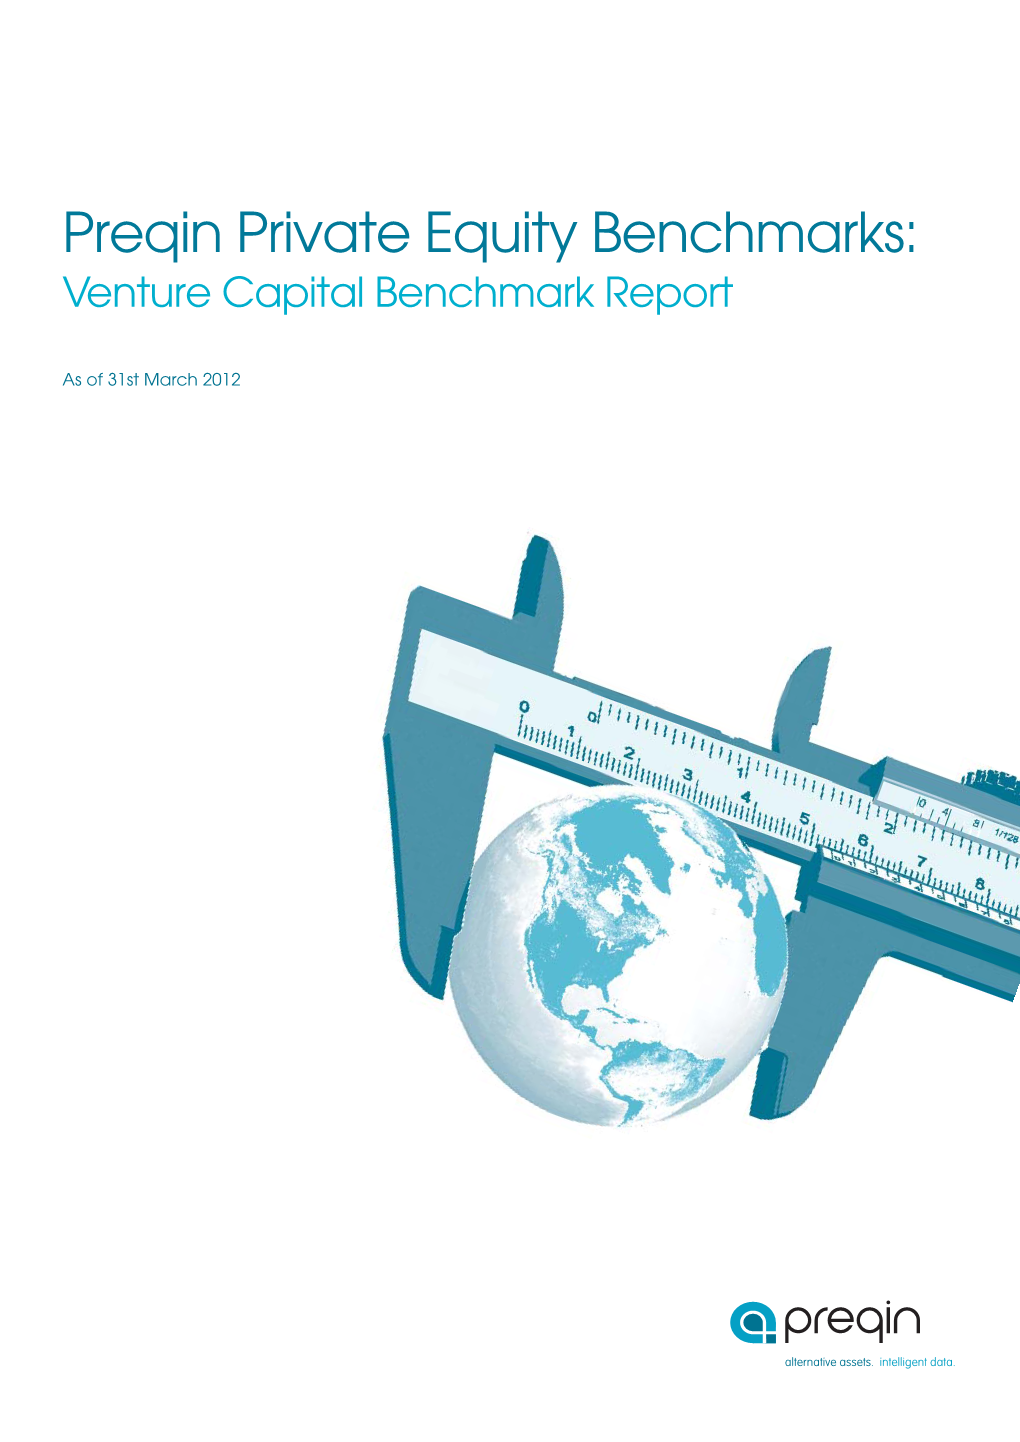 Preqin Private Equity Benchmarks: Venture Capital Benchmark Report